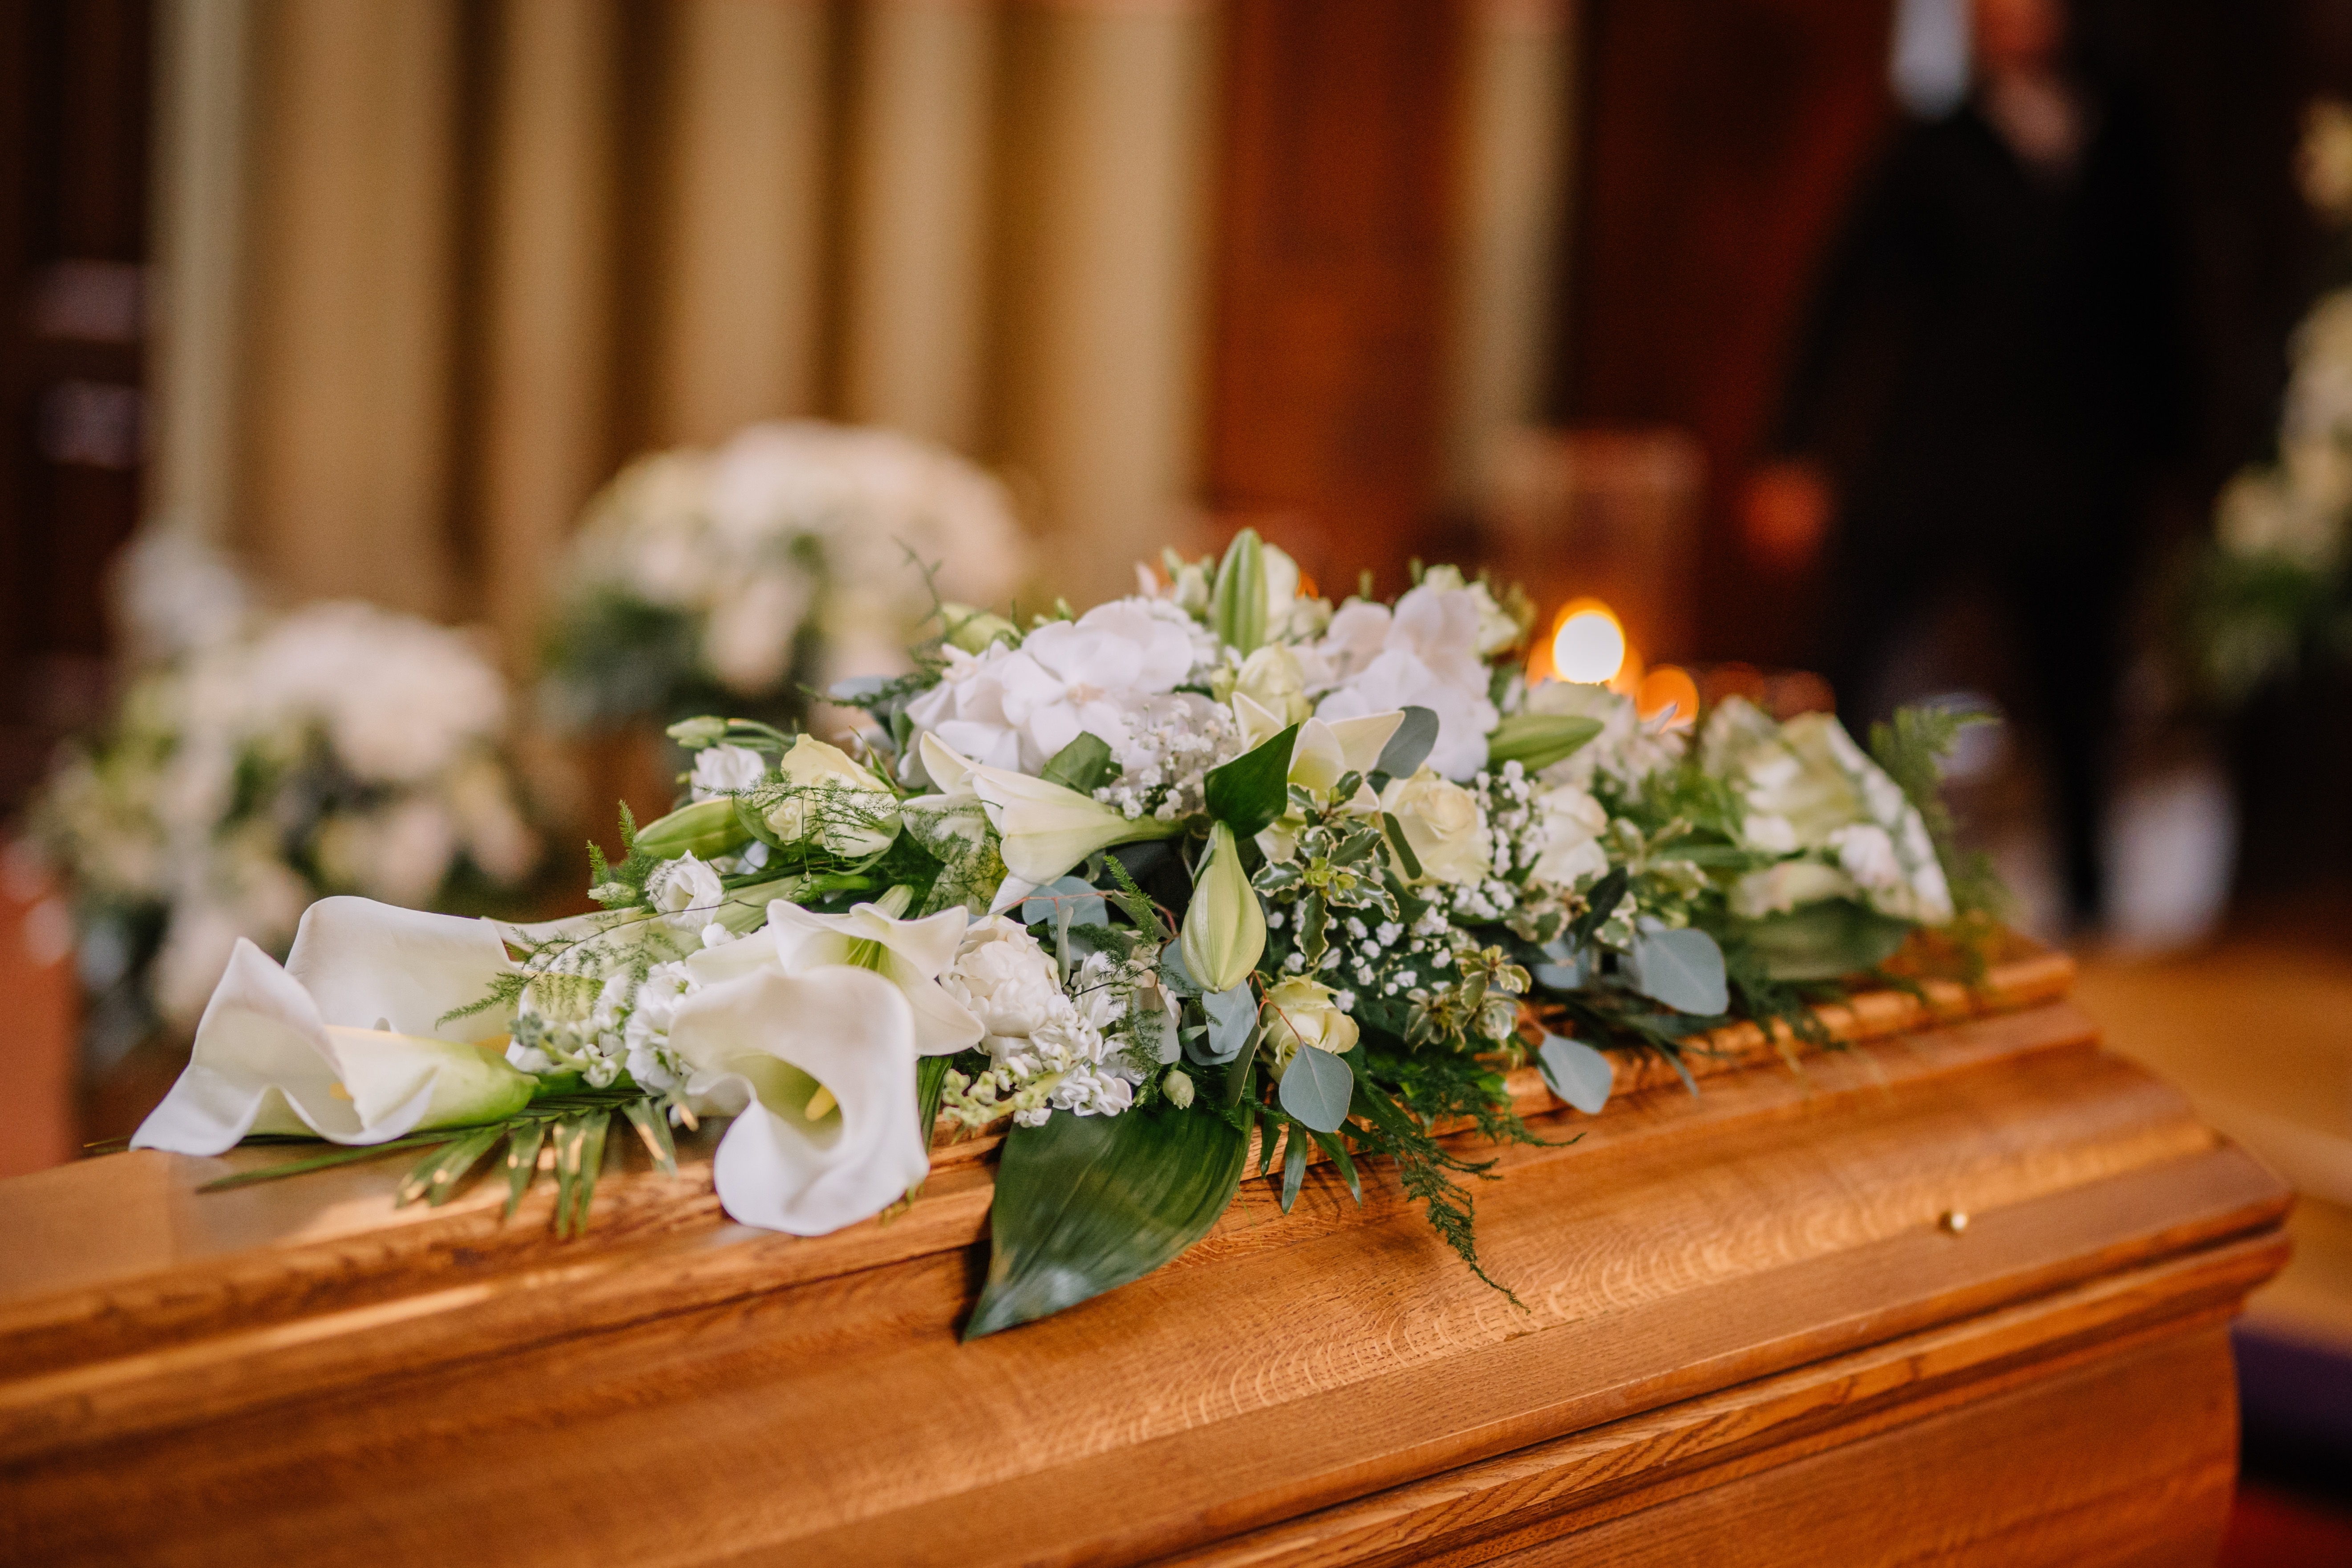 A coffin decorated with flowers | Source: Shutterstock